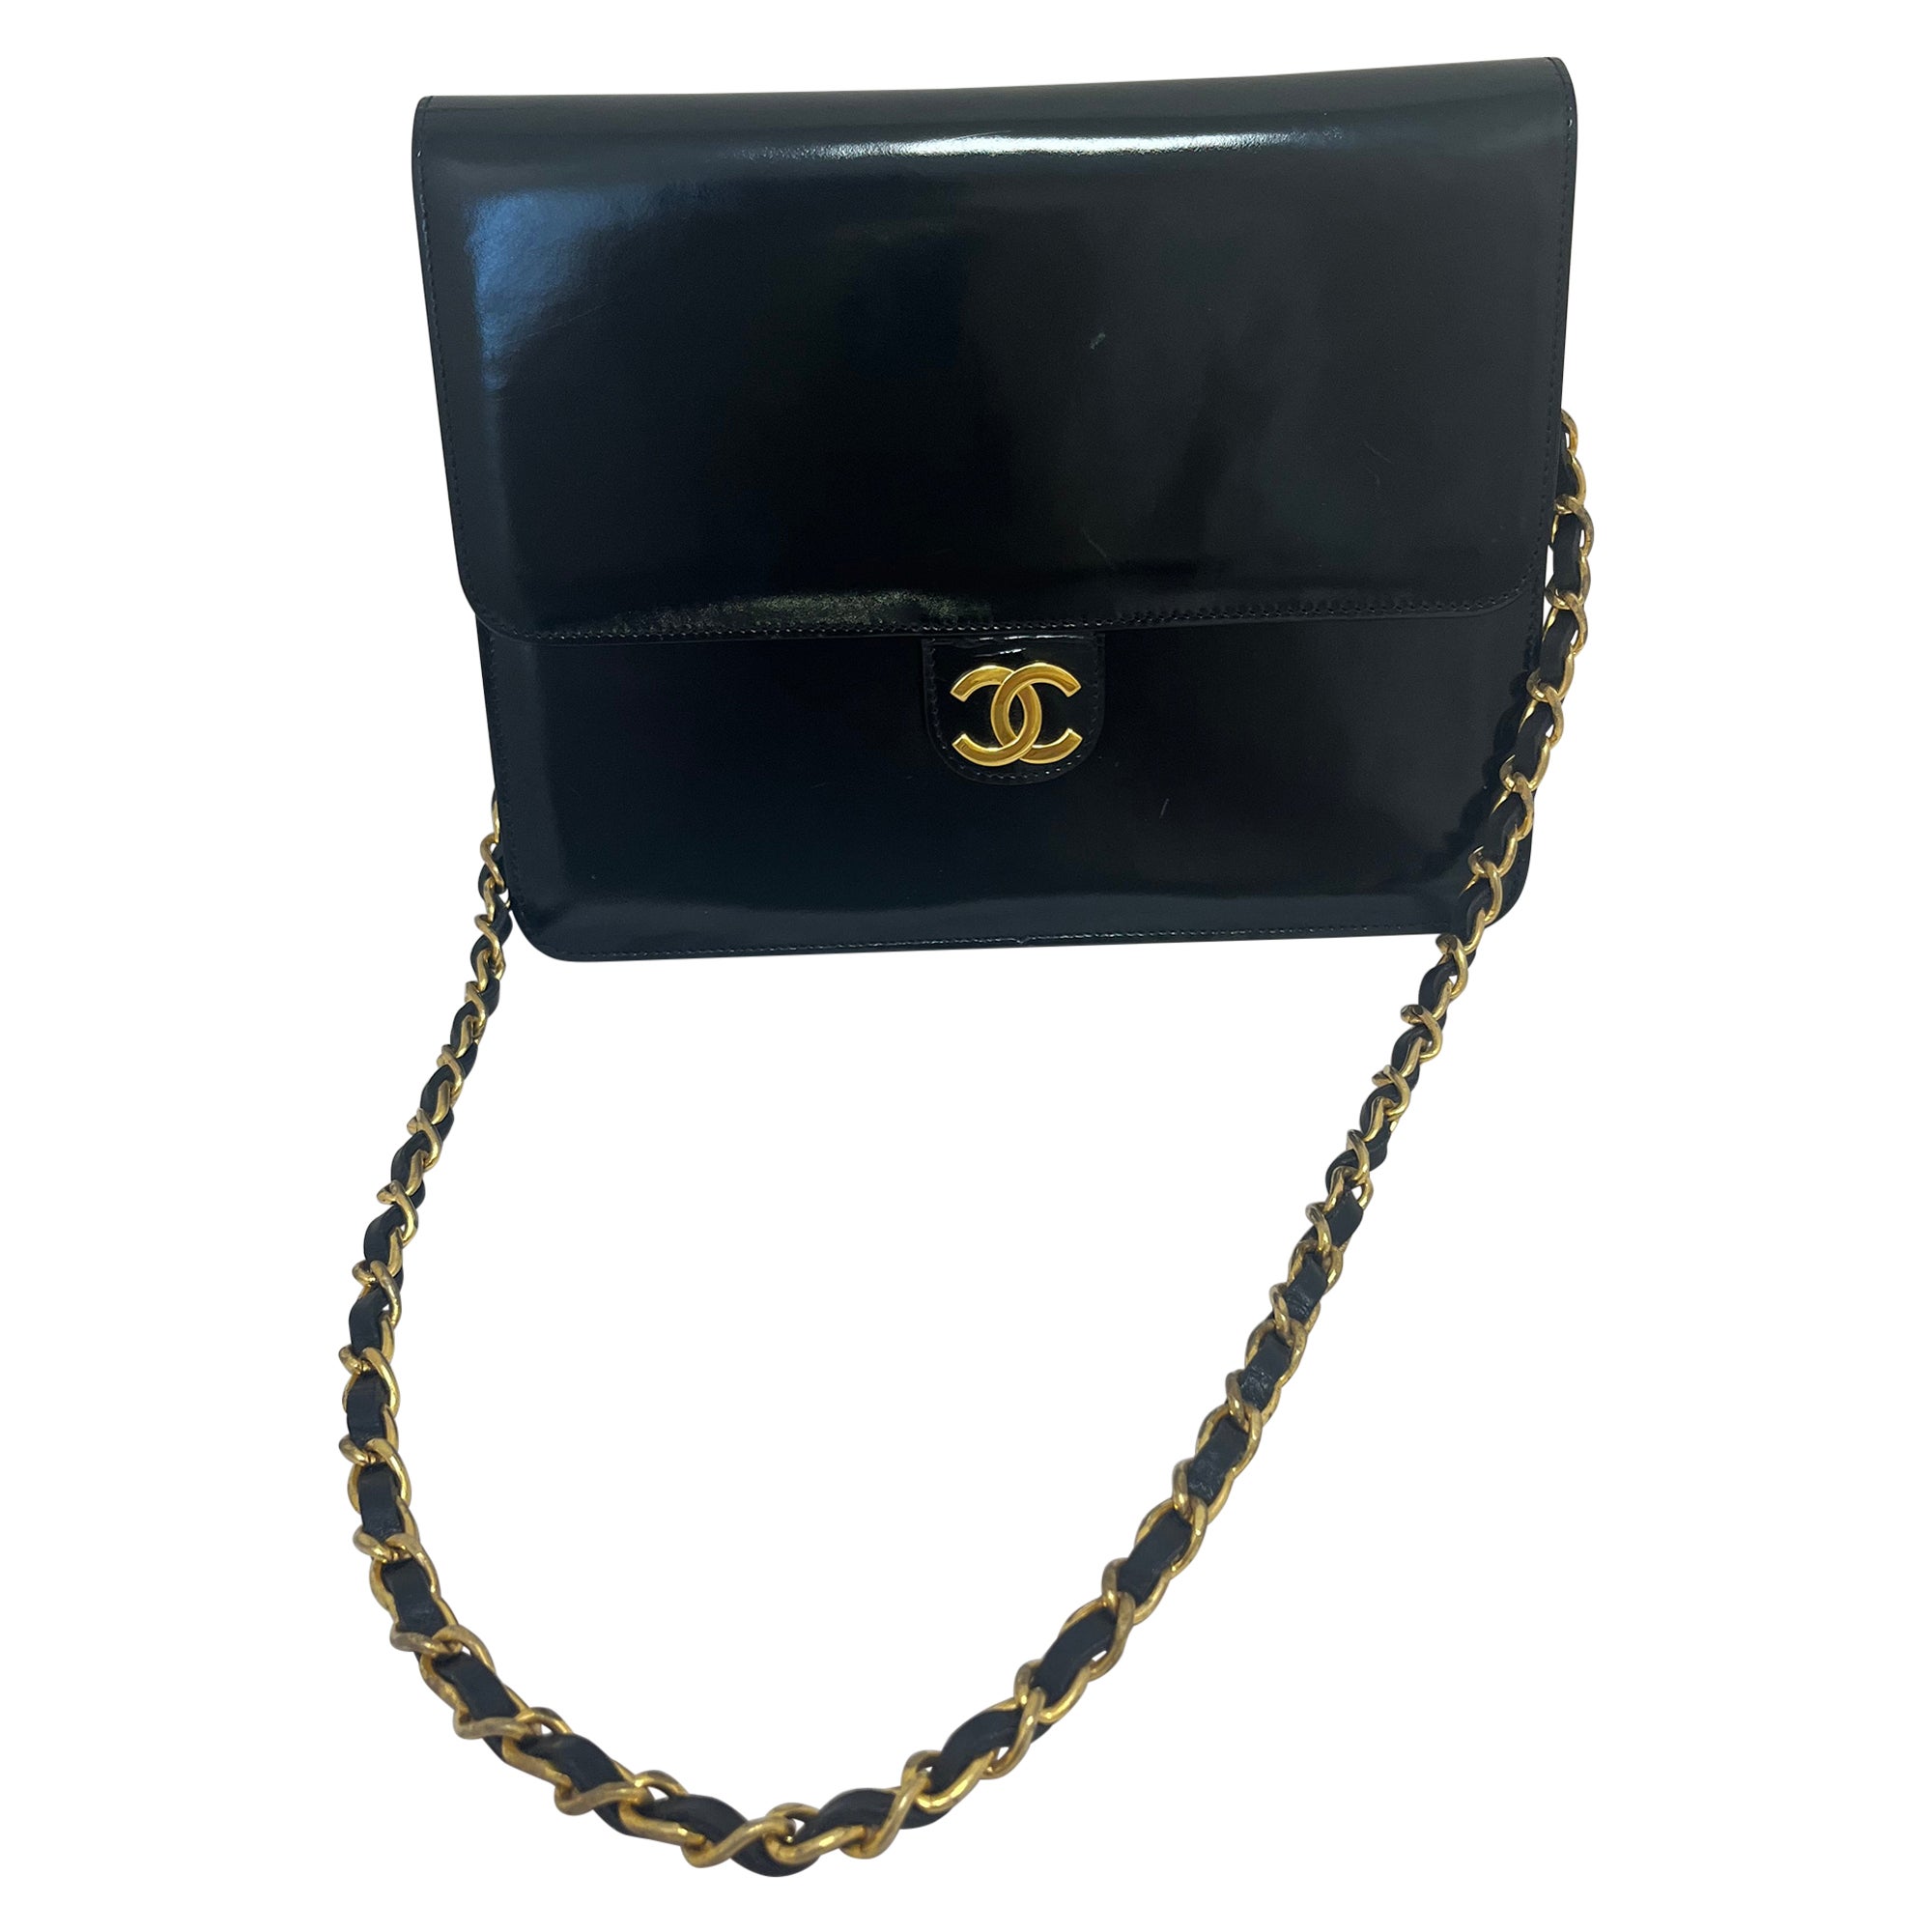 How do you date a vintage Chanel bag?